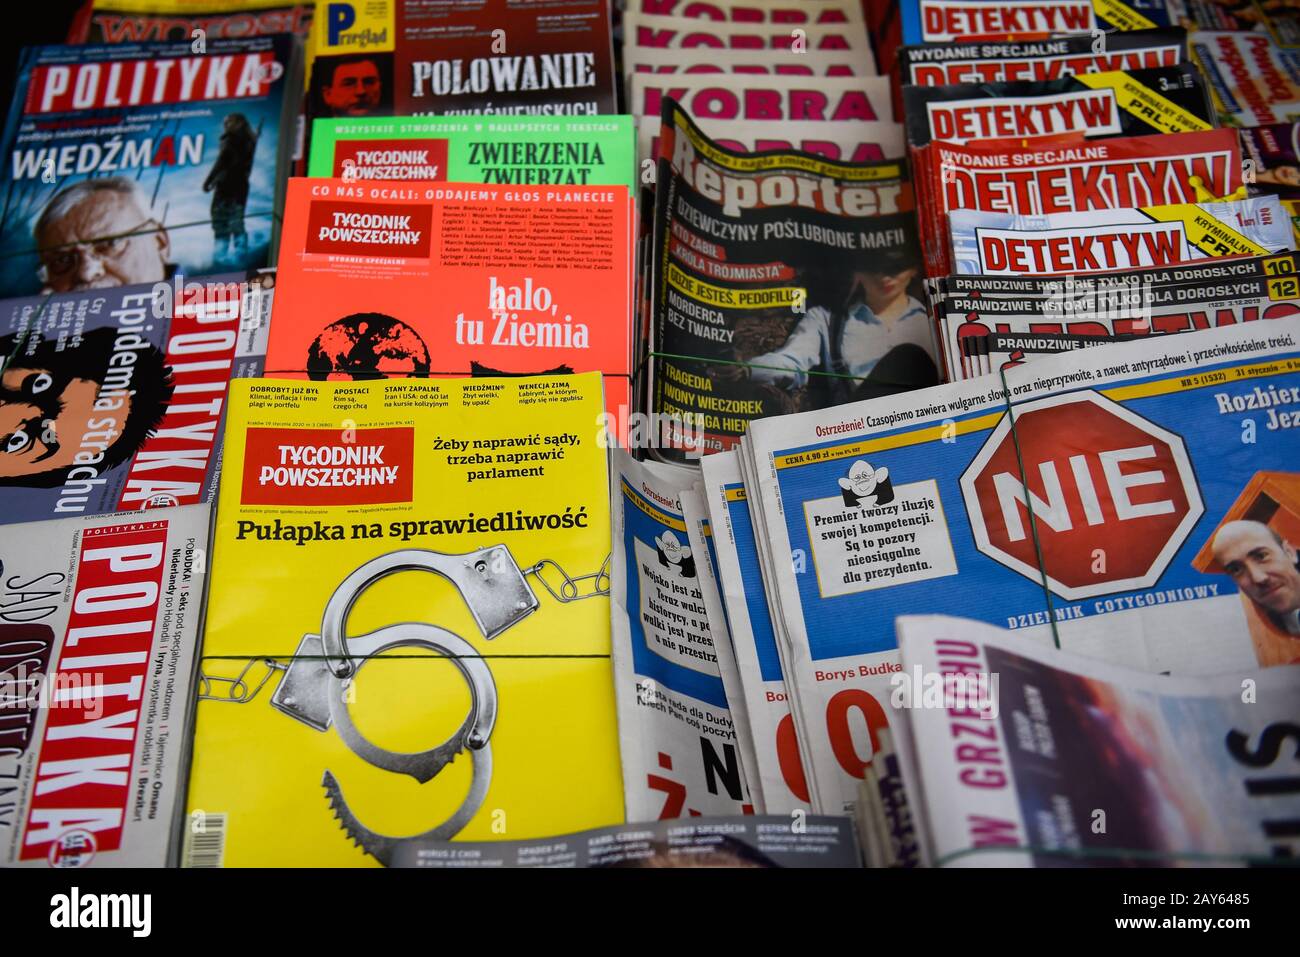 Weekly Polish news magazines for sale at the market.Nowy Klepasz is one of the many outdoor markets, where food products, clothes, groceries among other things are bought from micro traders. Stock Photo